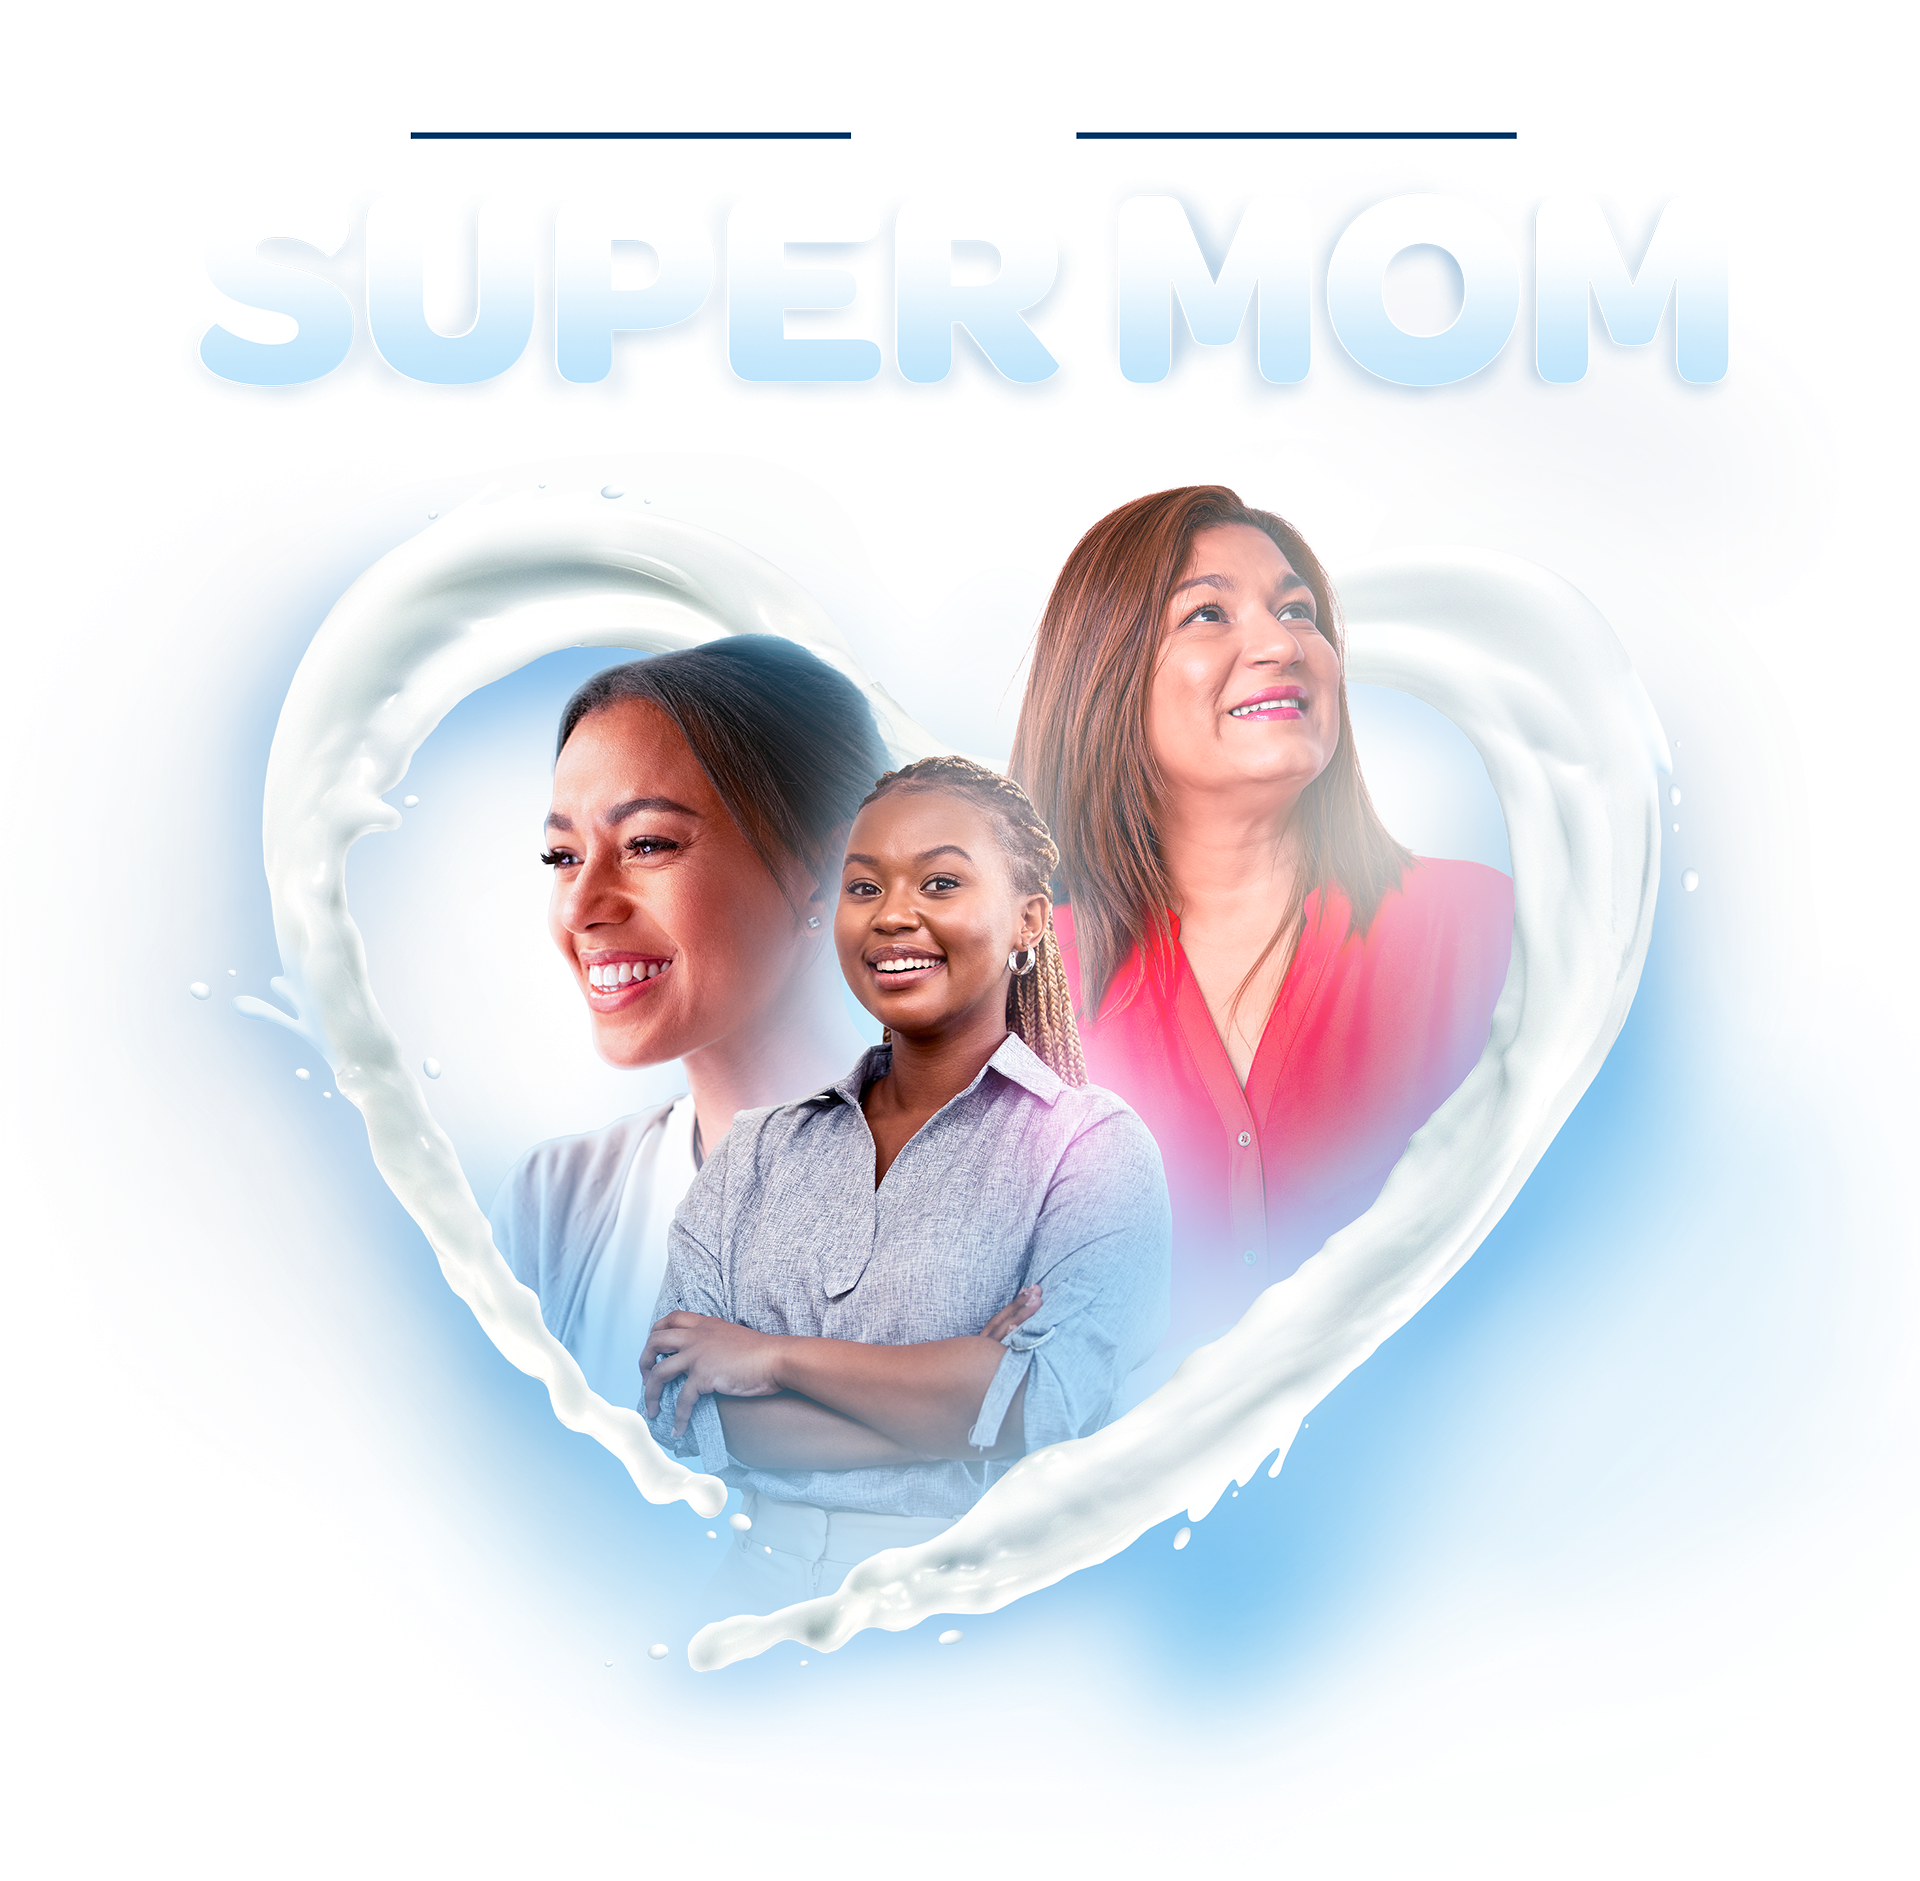 Because every Mom is a Super Mom